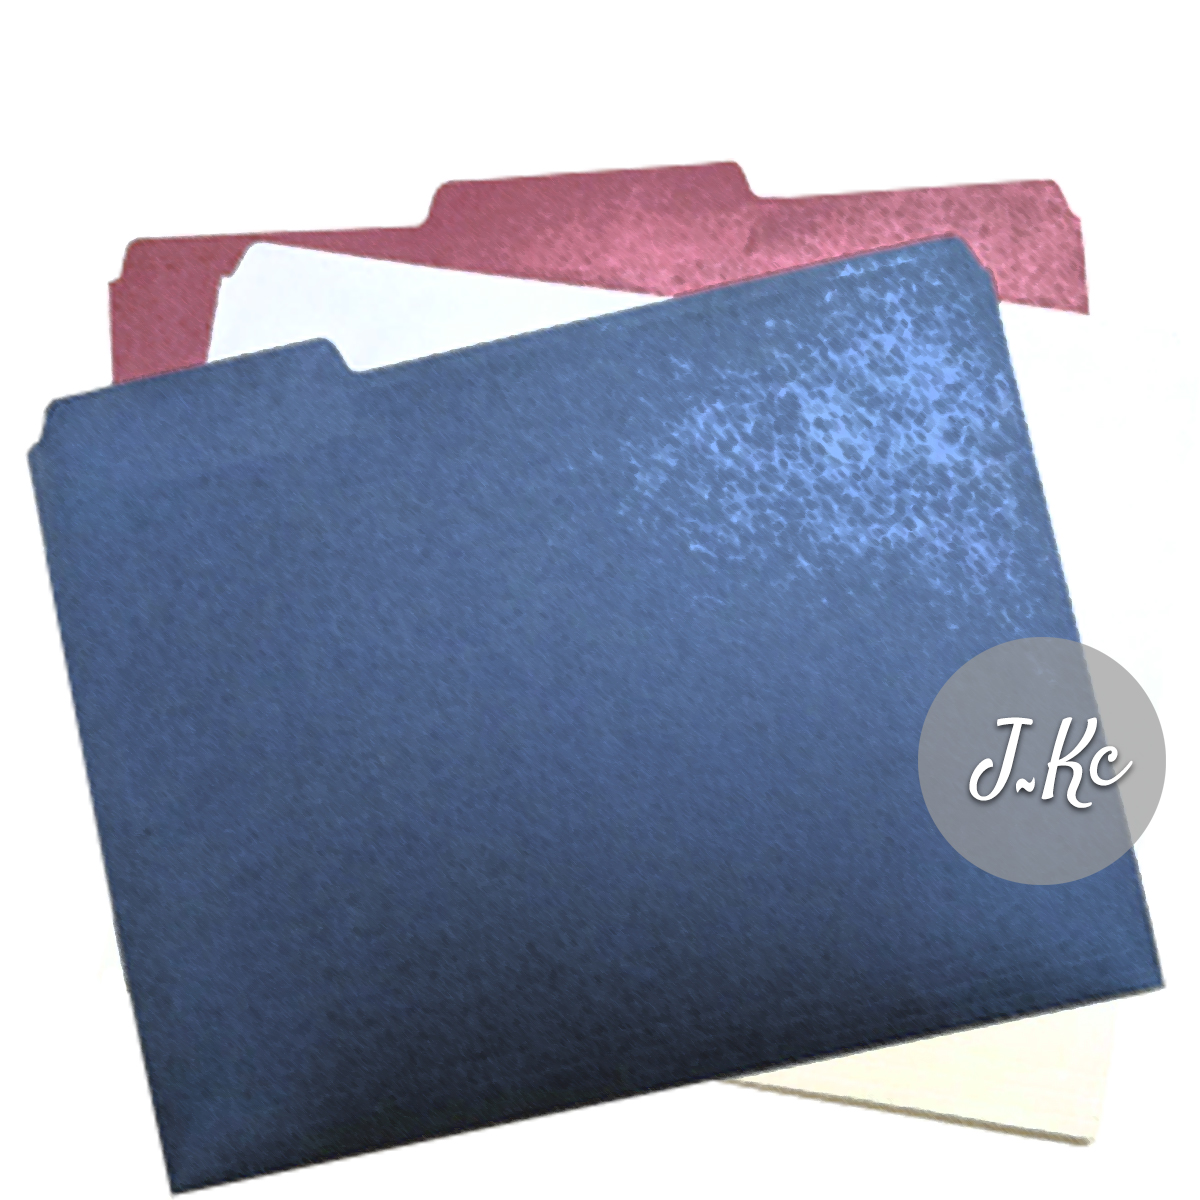 Red, white, and blue office folders used to organize projects.